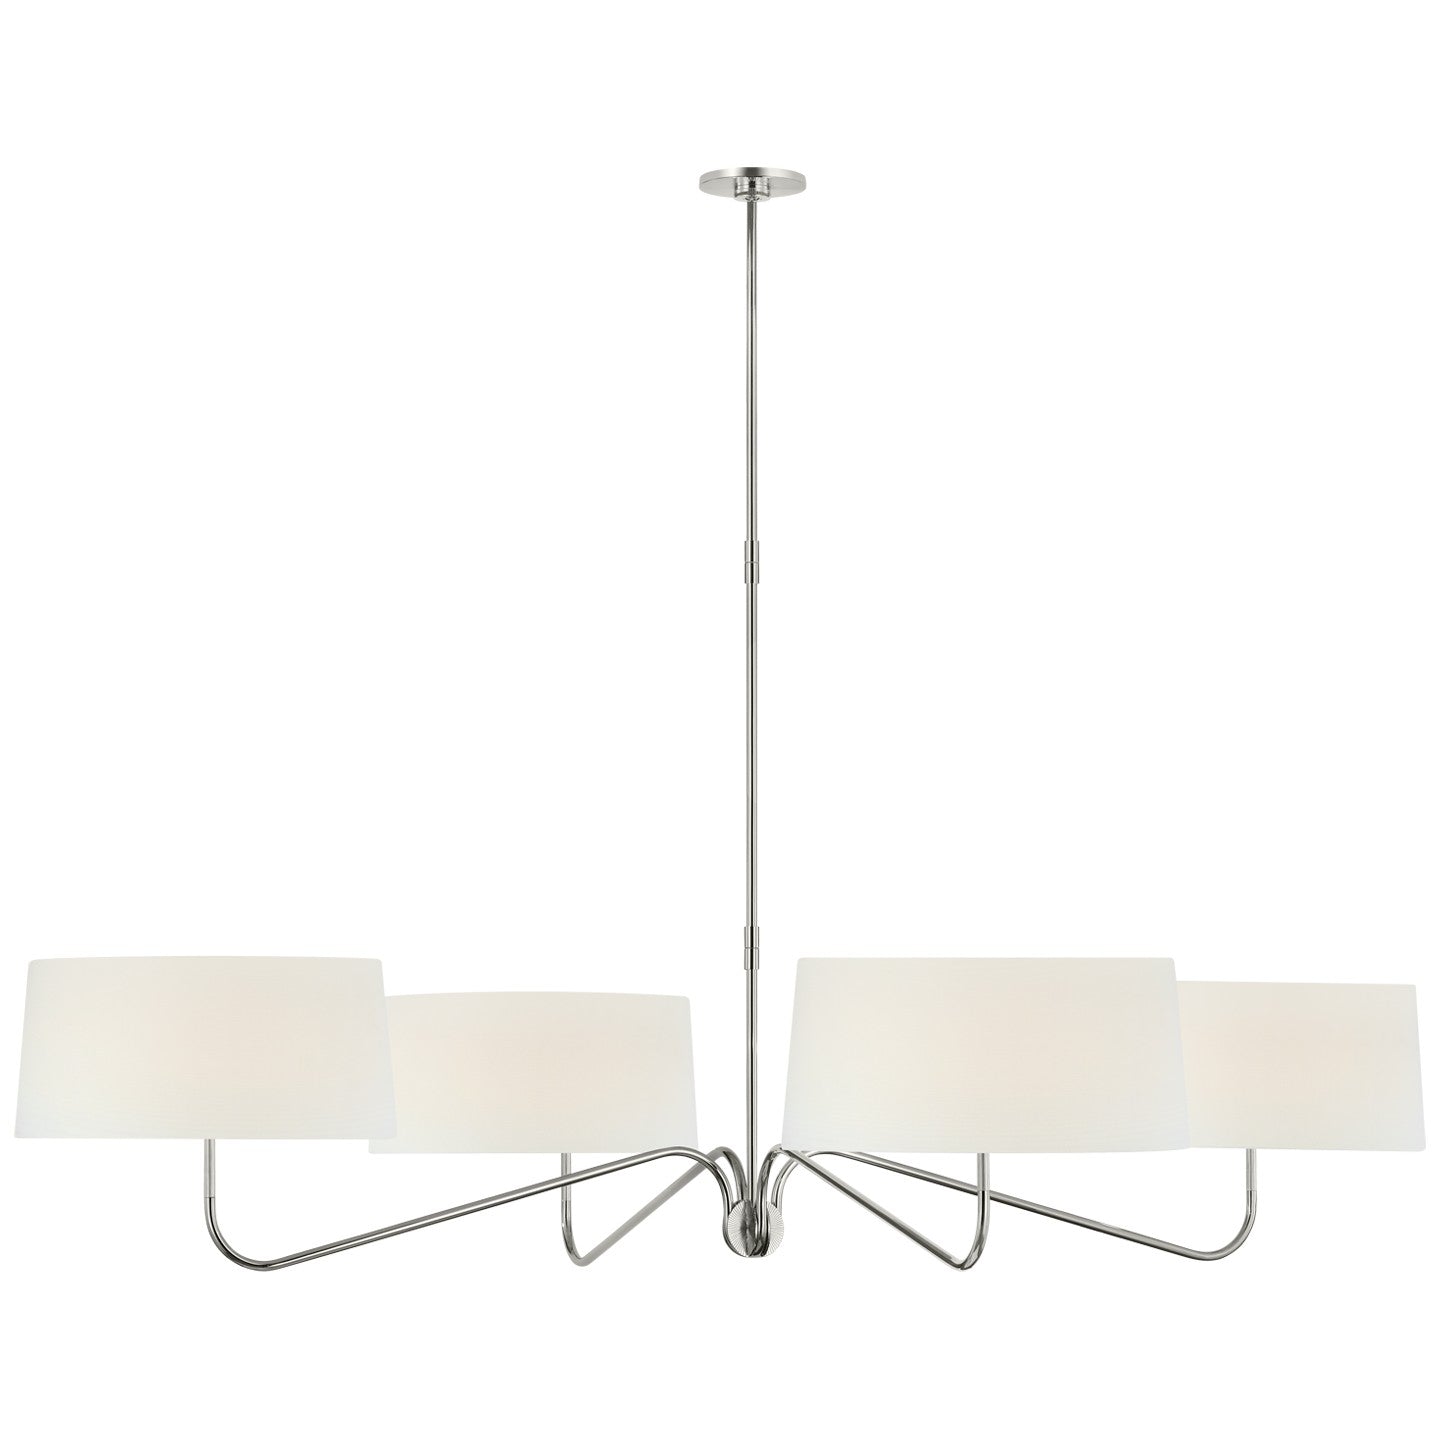 Visual Comfort Signature - TOB 5350PN-L - LED Chandelier - Canto - Polished Nickel